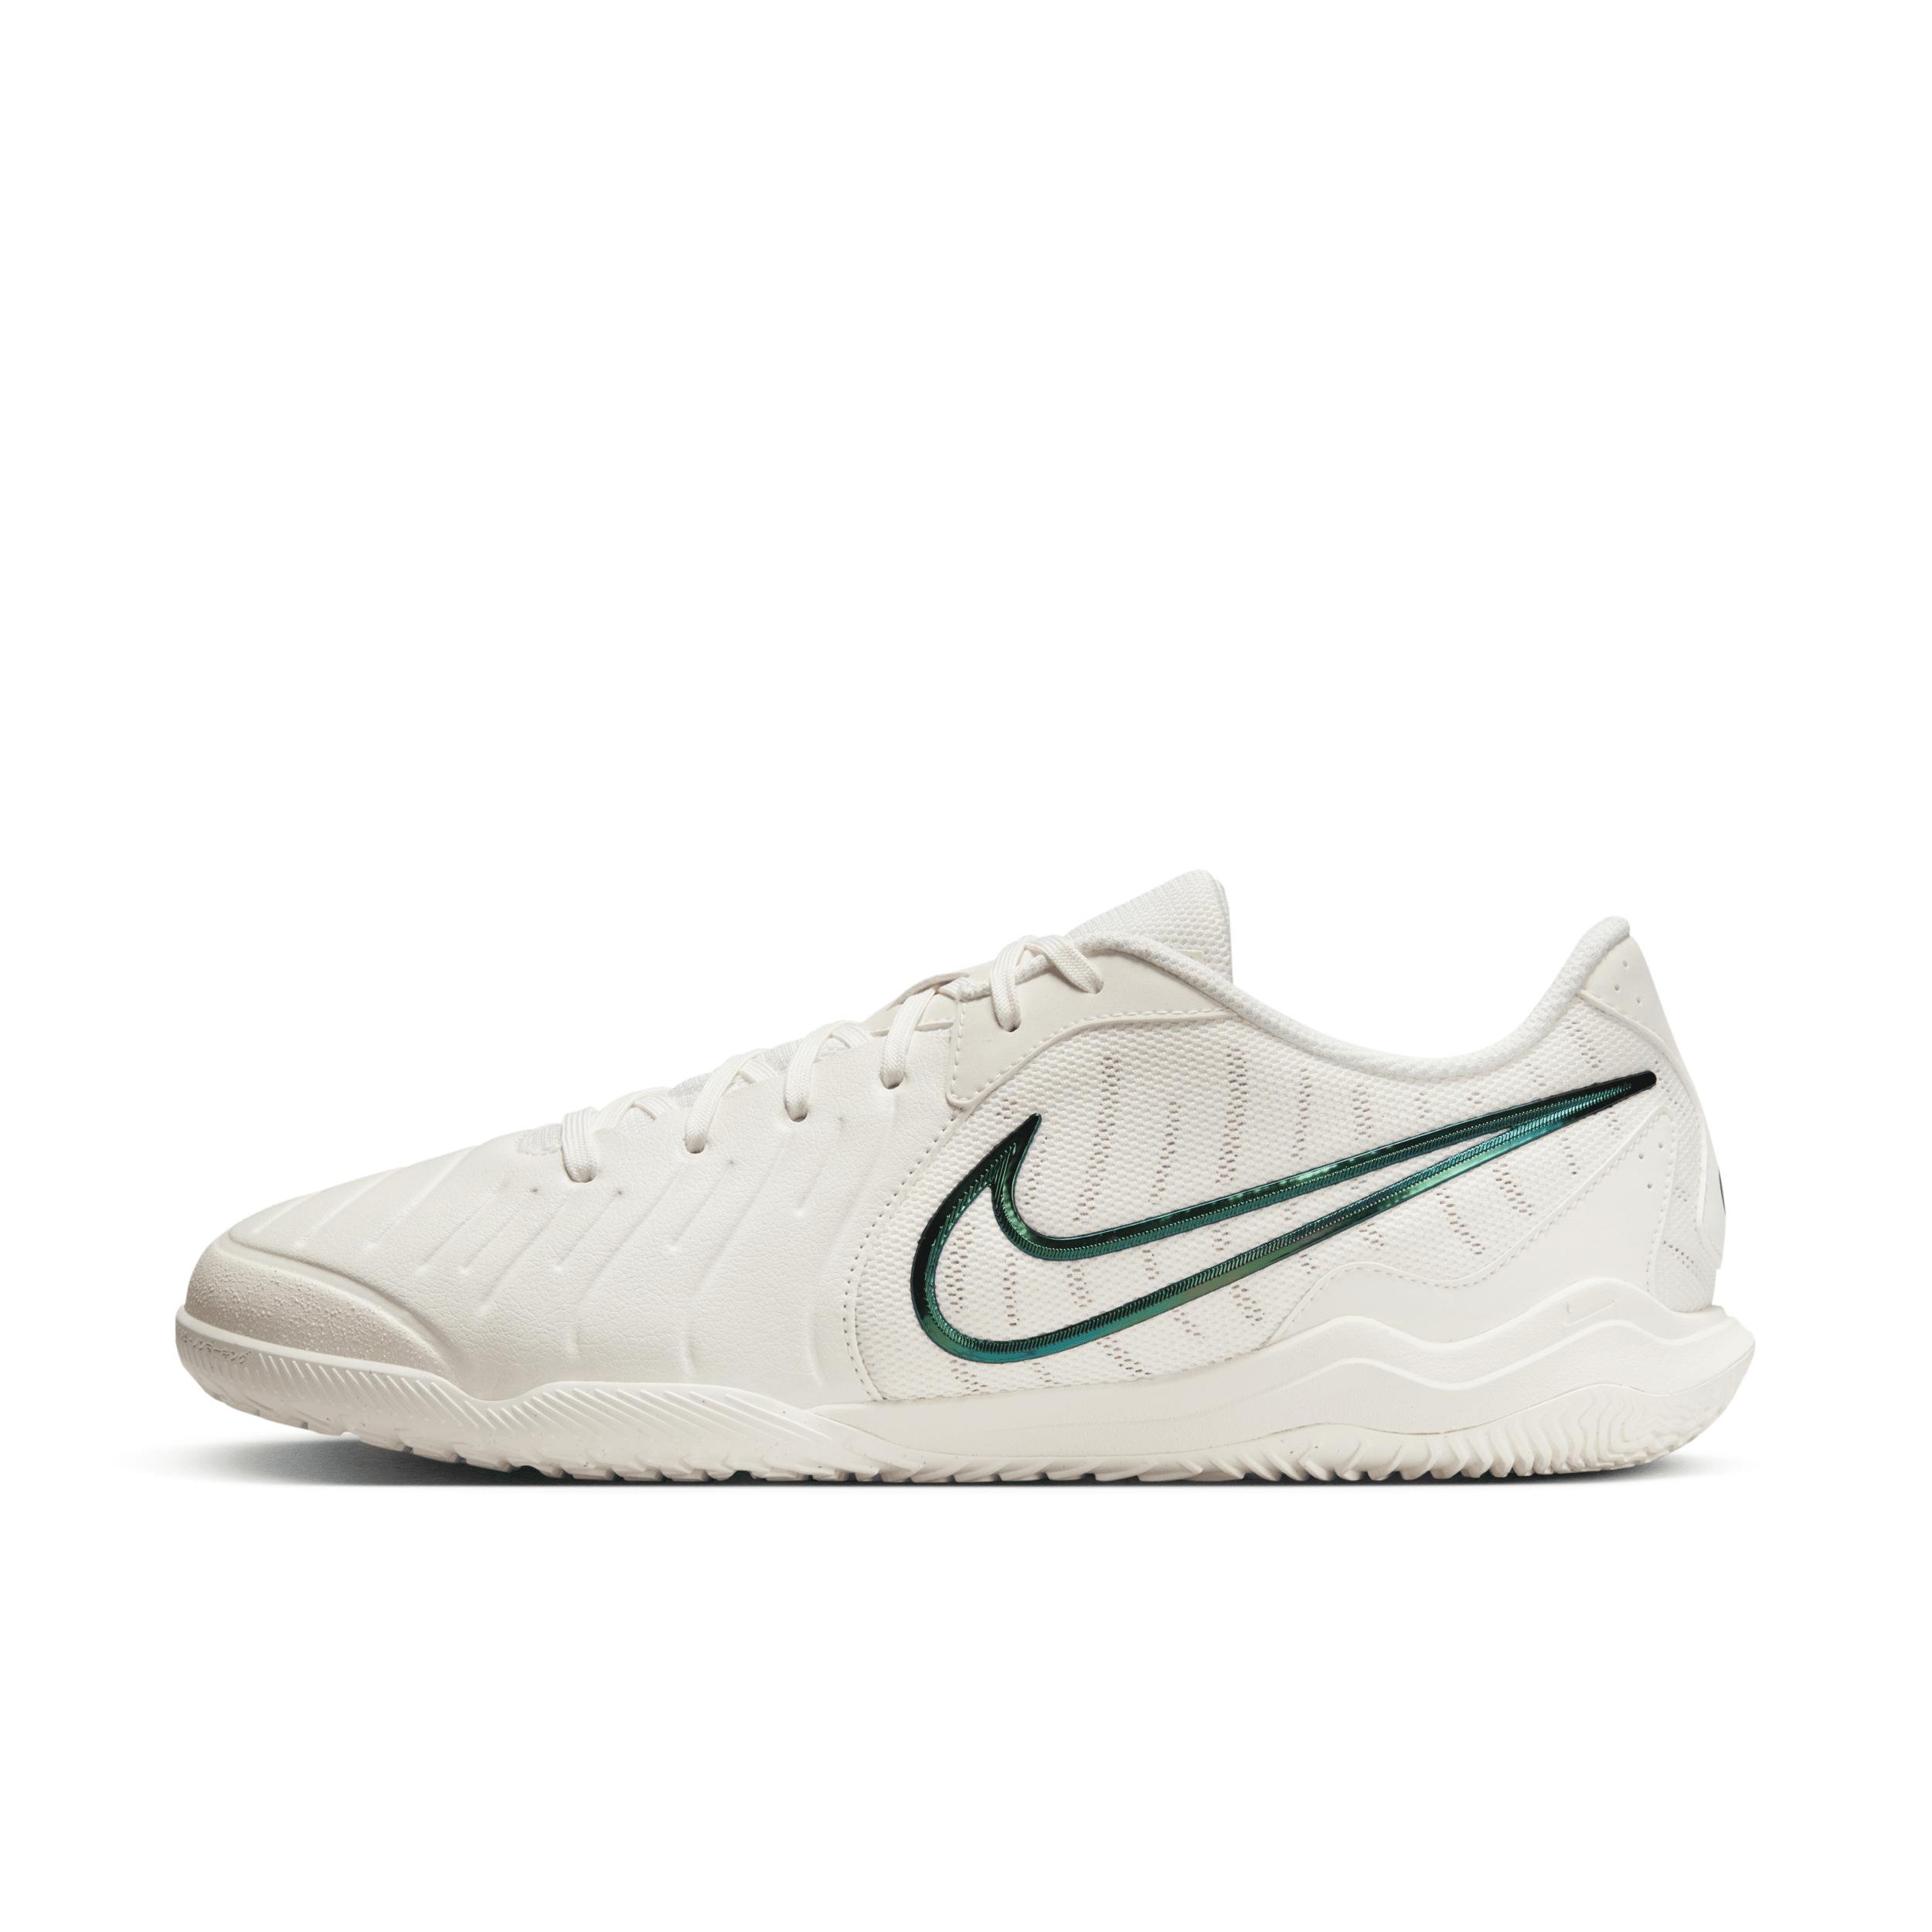 Nike Men's Tiempo Legend 10 Academy 30 IC Low-Top Soccer Shoes by NIKE